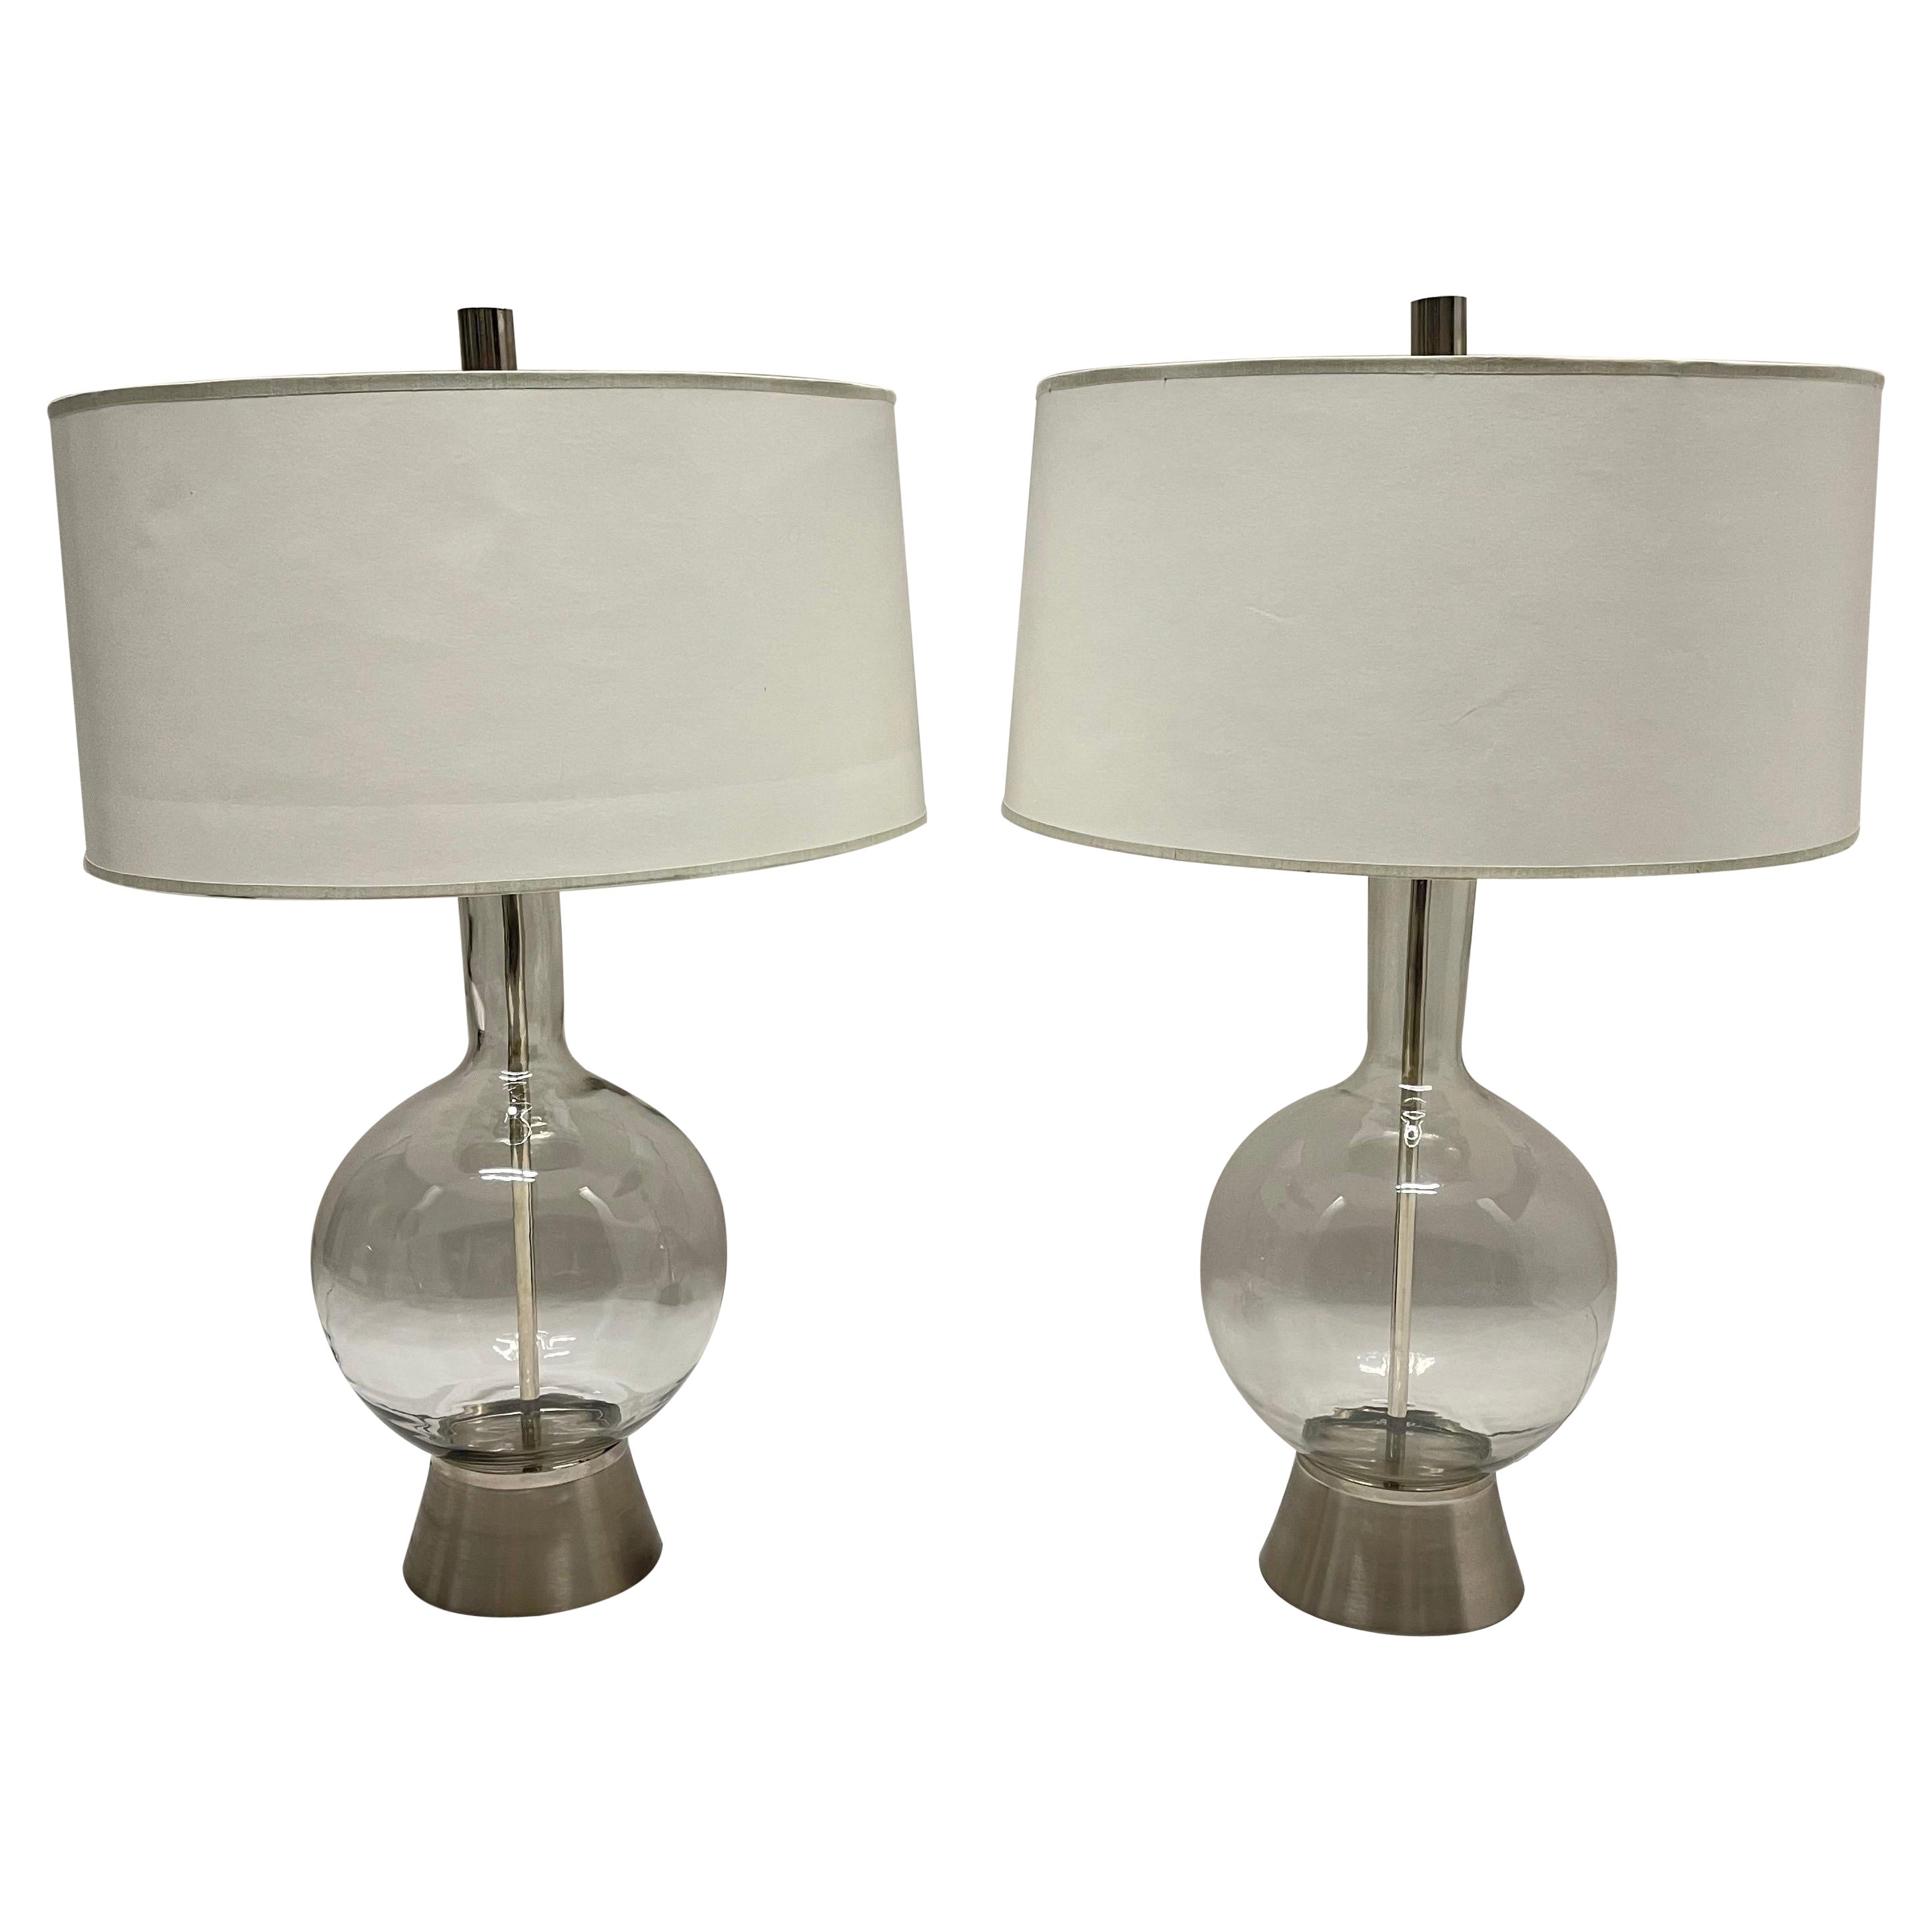 Pair of Mid-Century Mouth Blown Glass and Brushed Nickel Lamp with Paper Shades